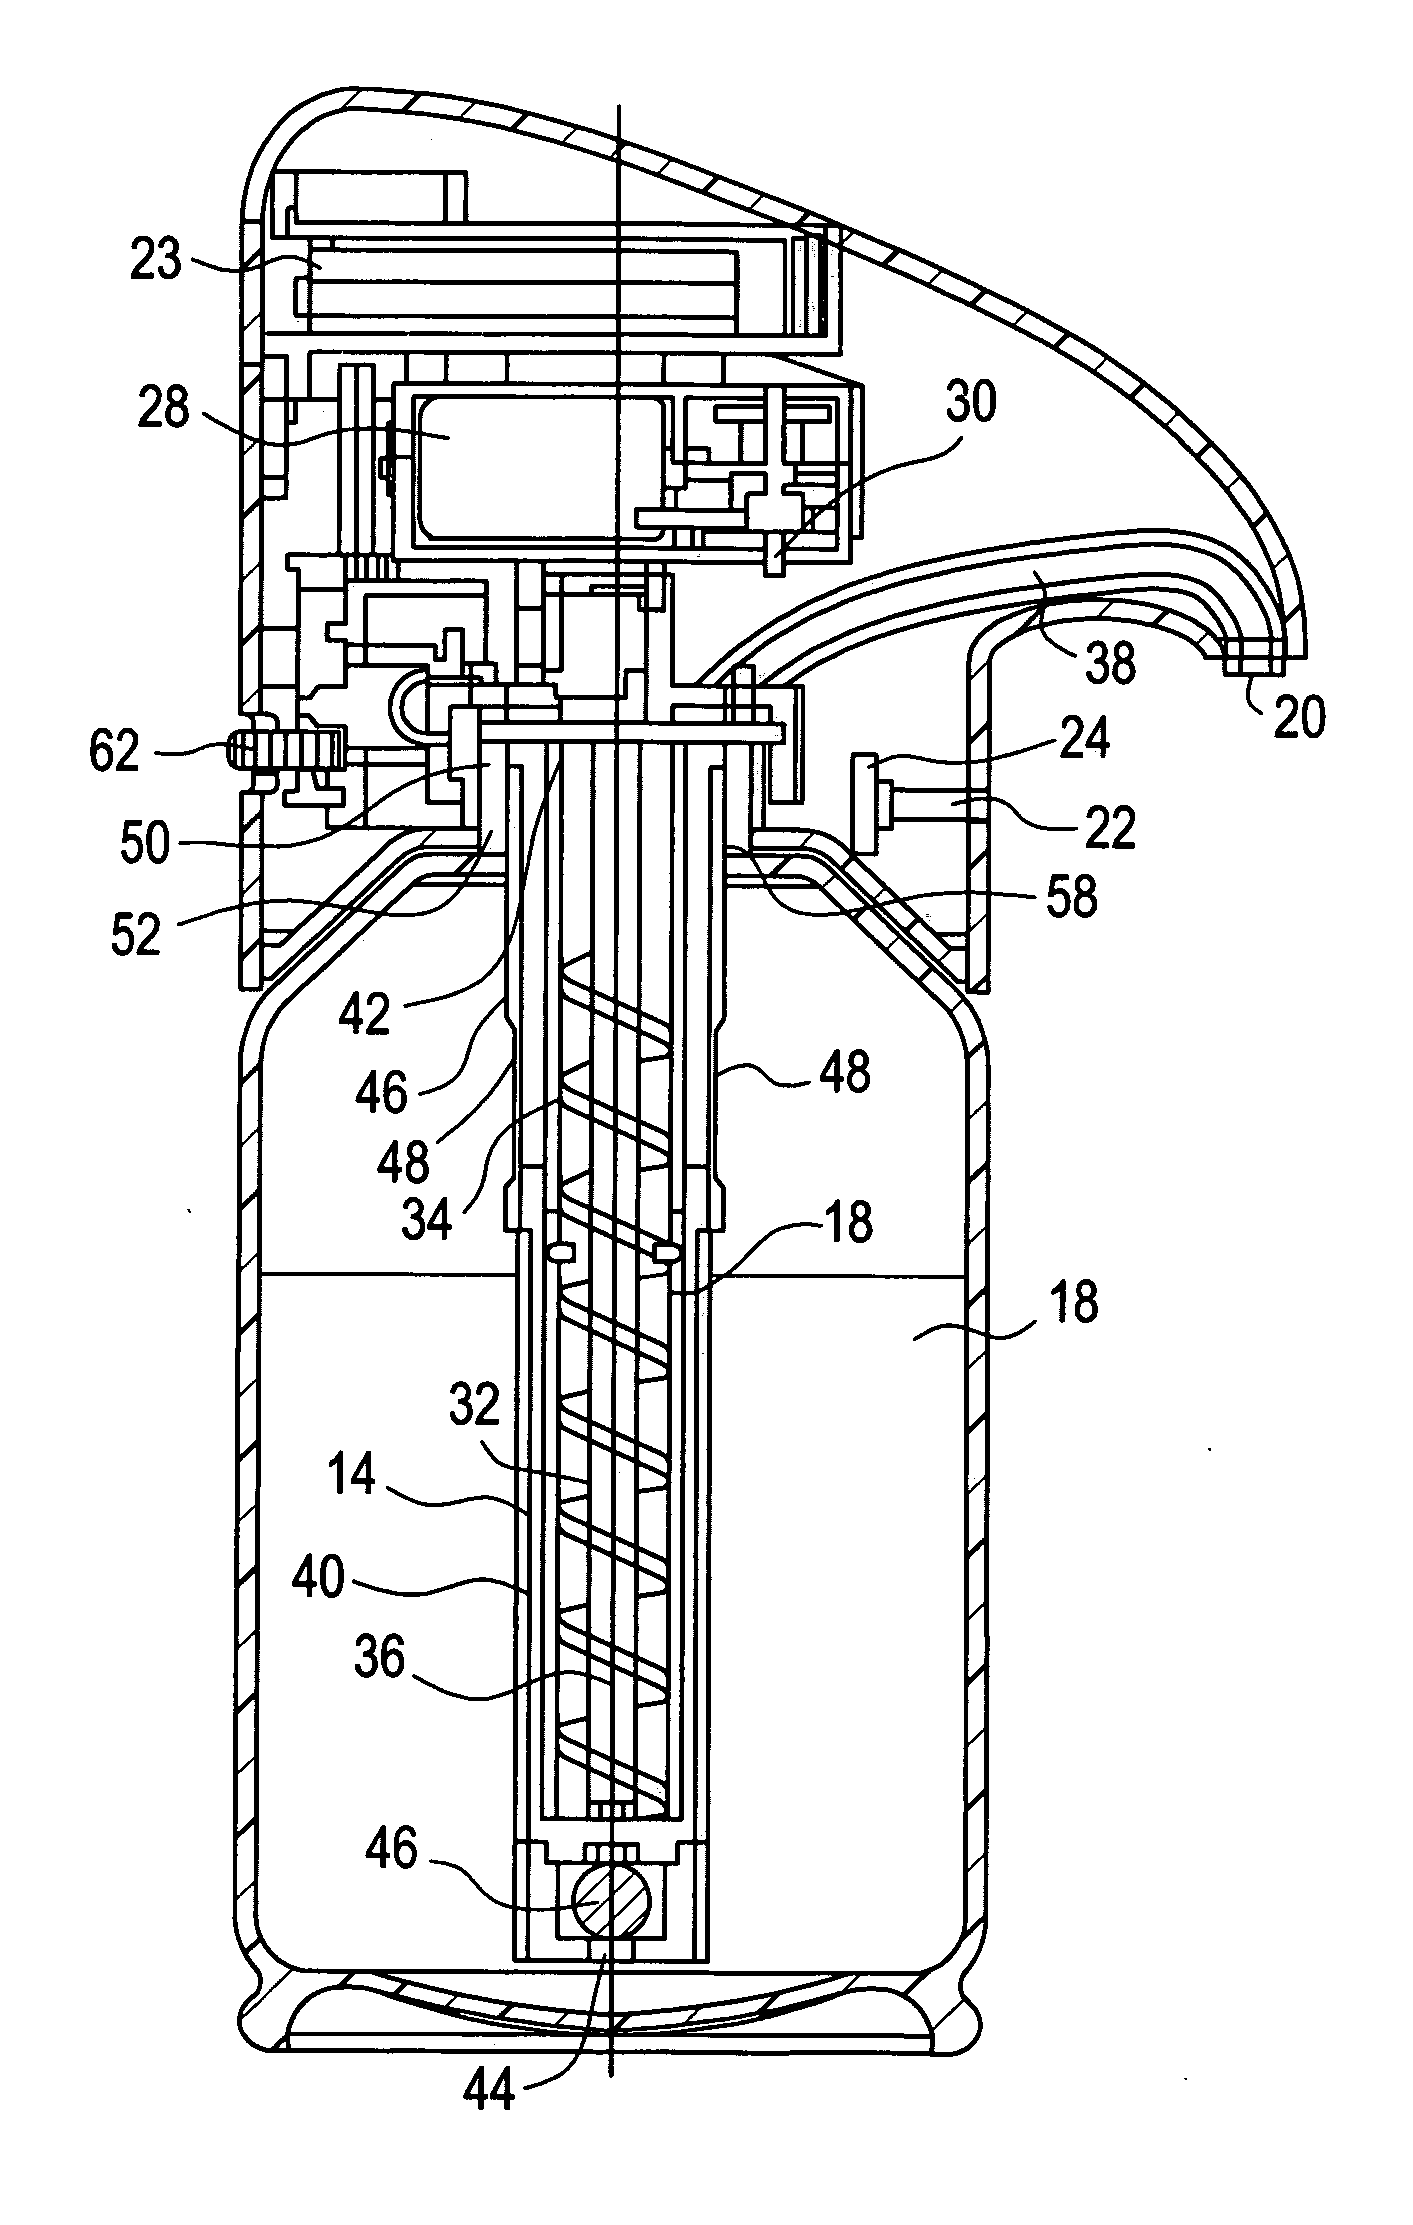 Self-contained, portable and automatic fluid dispenser